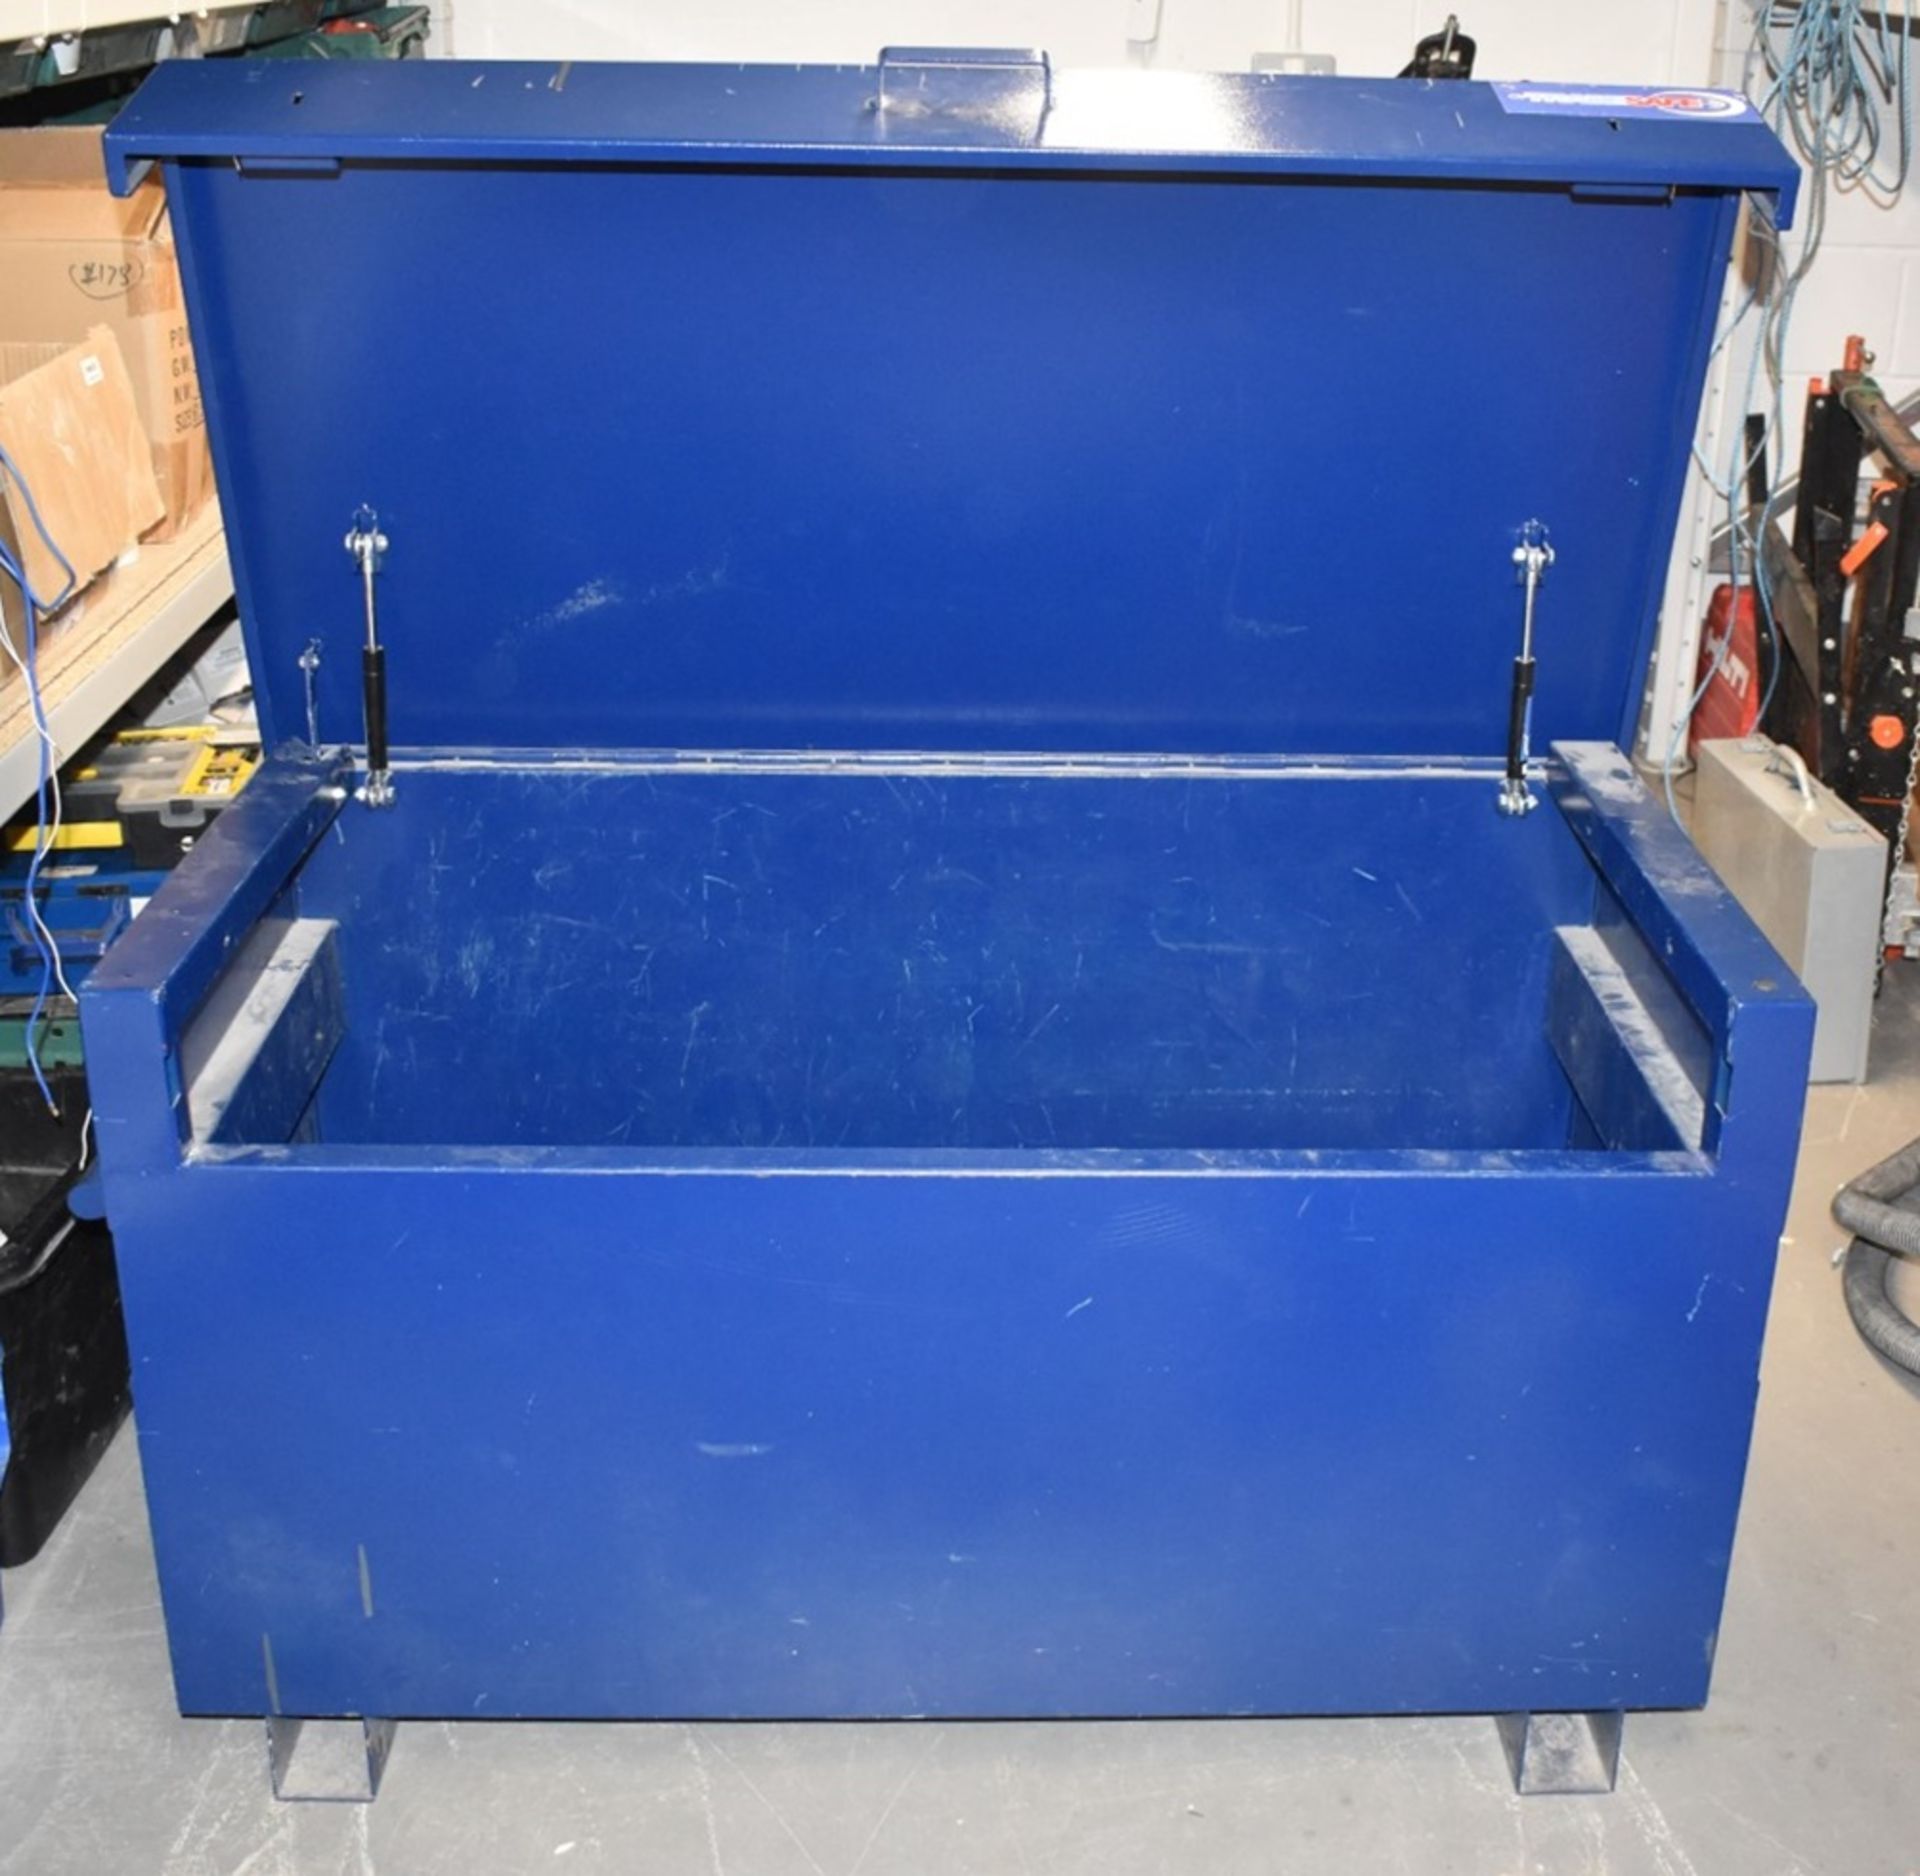 1 x TradeSafe Tool Storage Chest - Ideal For Use on Worksites and Vans To Help Protect Your - Image 3 of 4